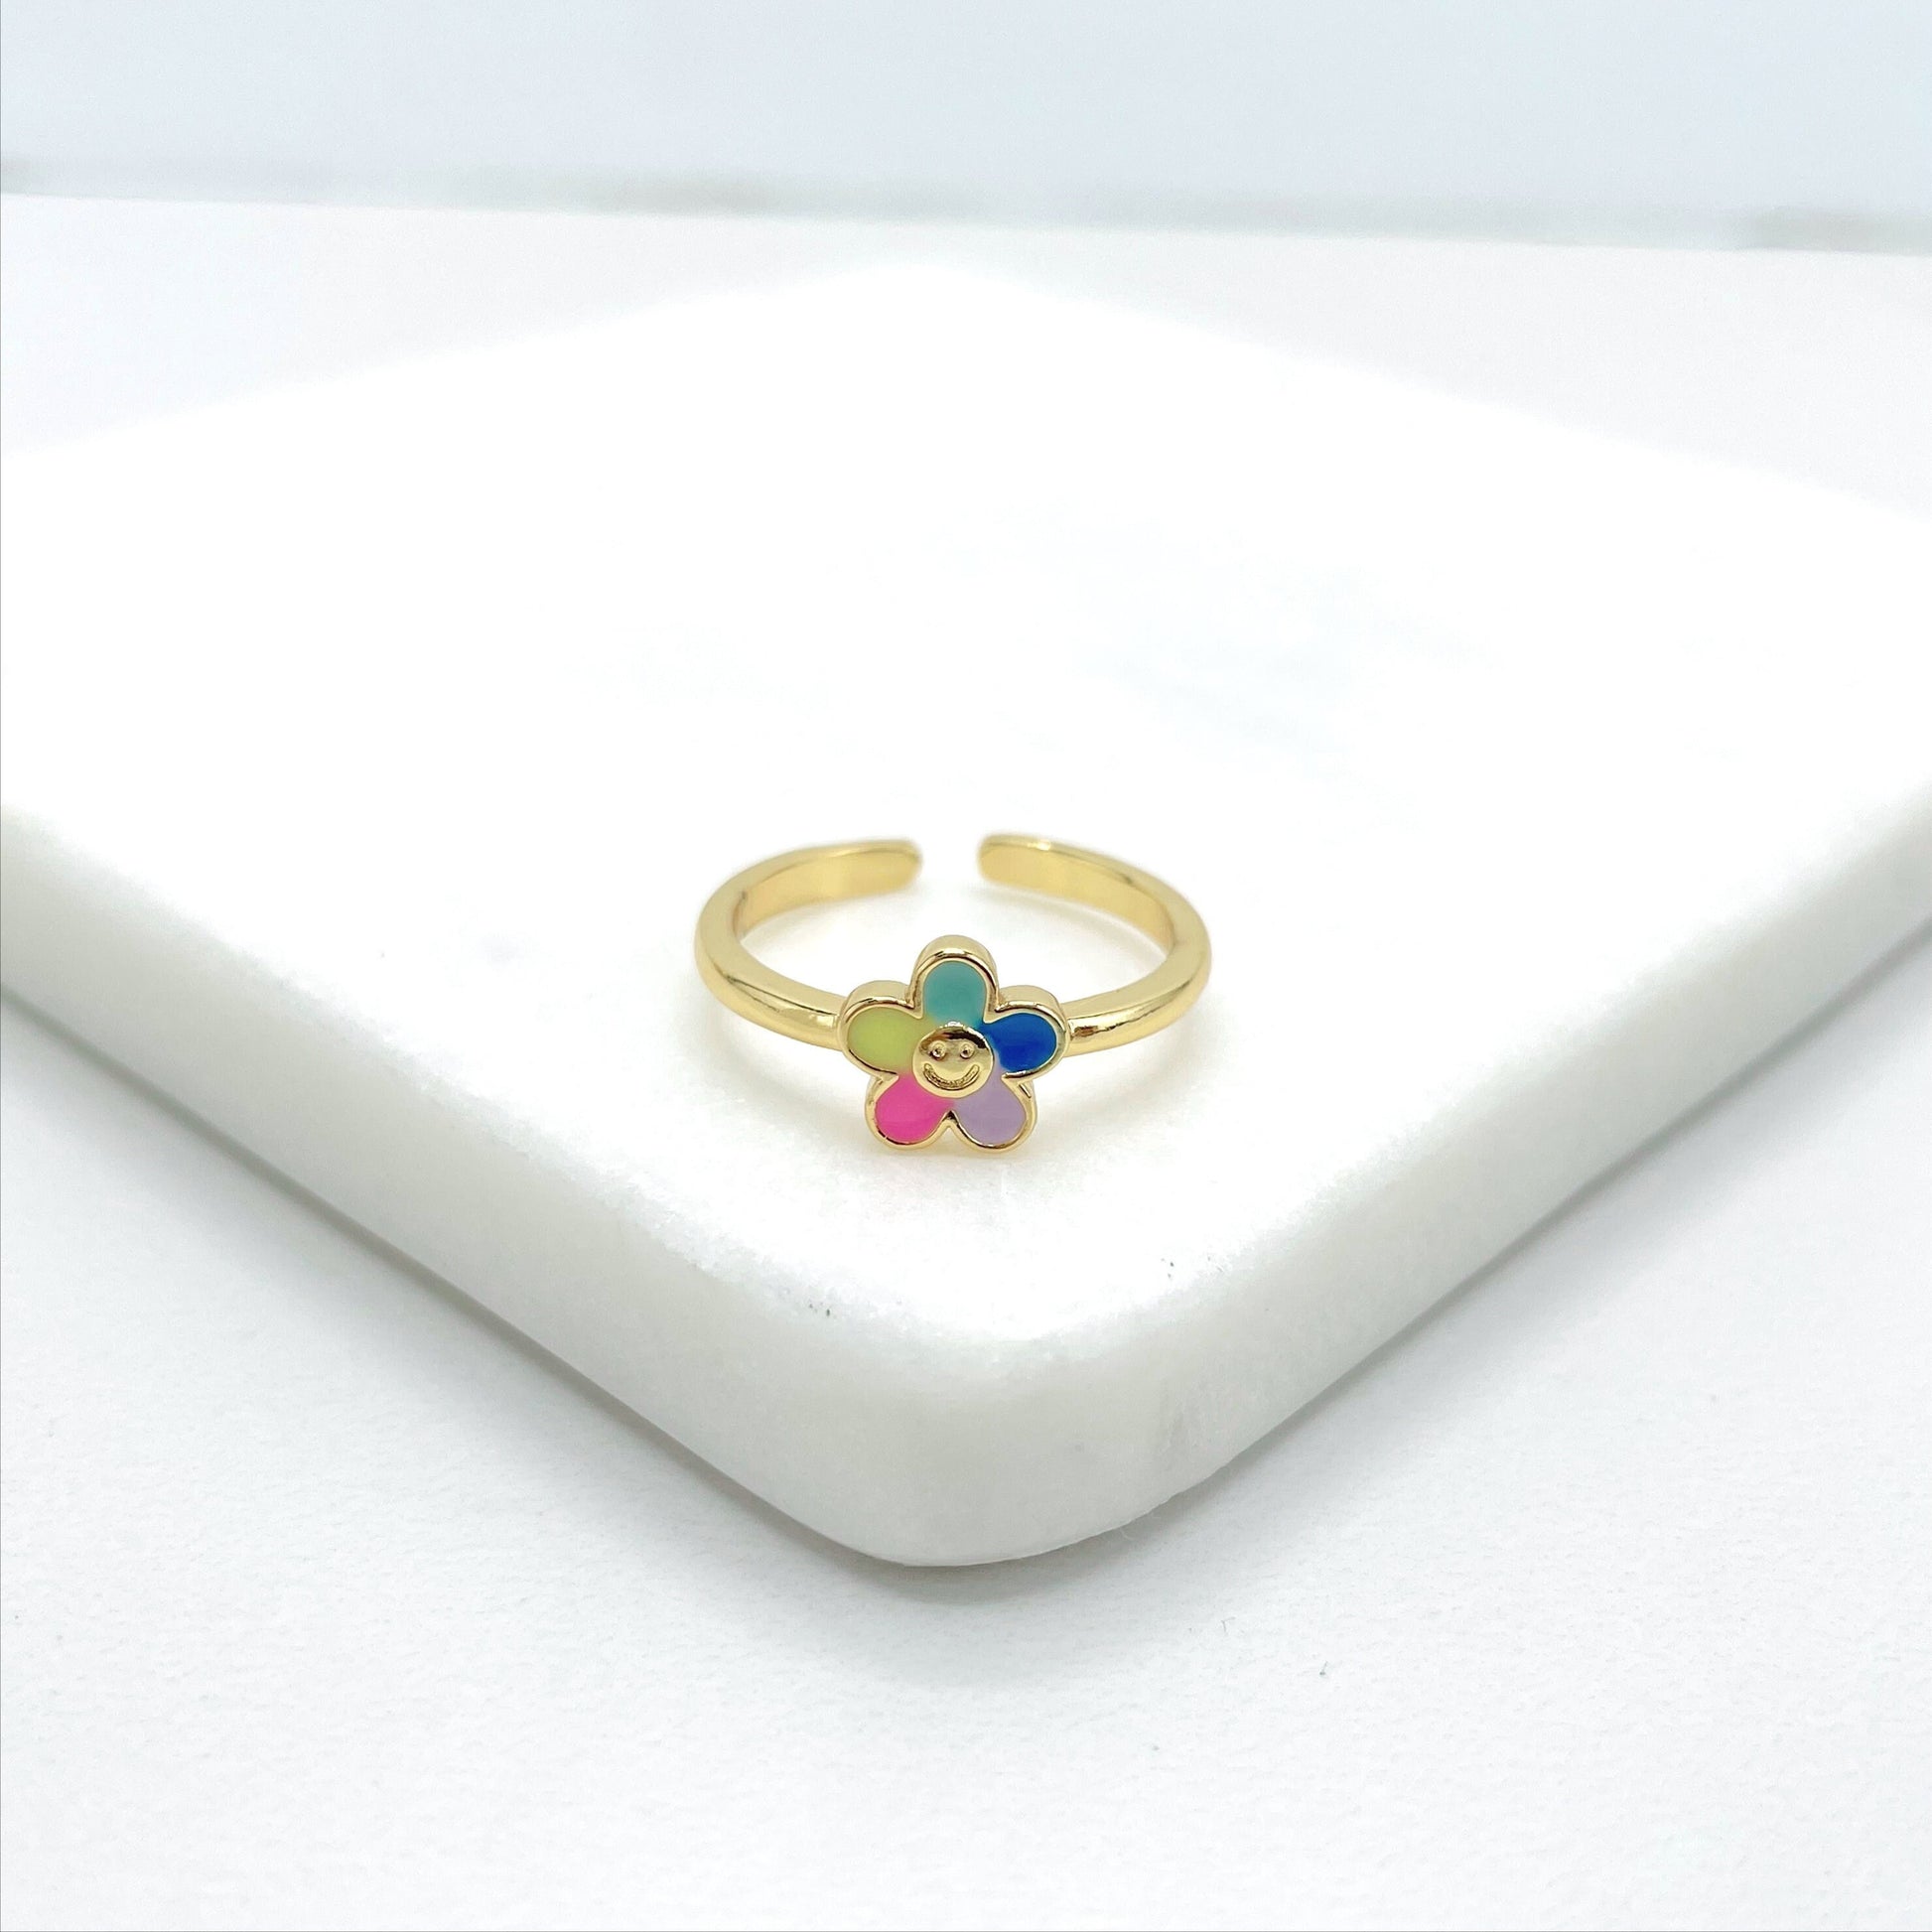 18k Gold Filled Colored Enamel Smile Happy Funny Face Flower, Yellow, Green, Blue, Pink & Purple Adjustable Ring, Wholesale Jewelry Supplies